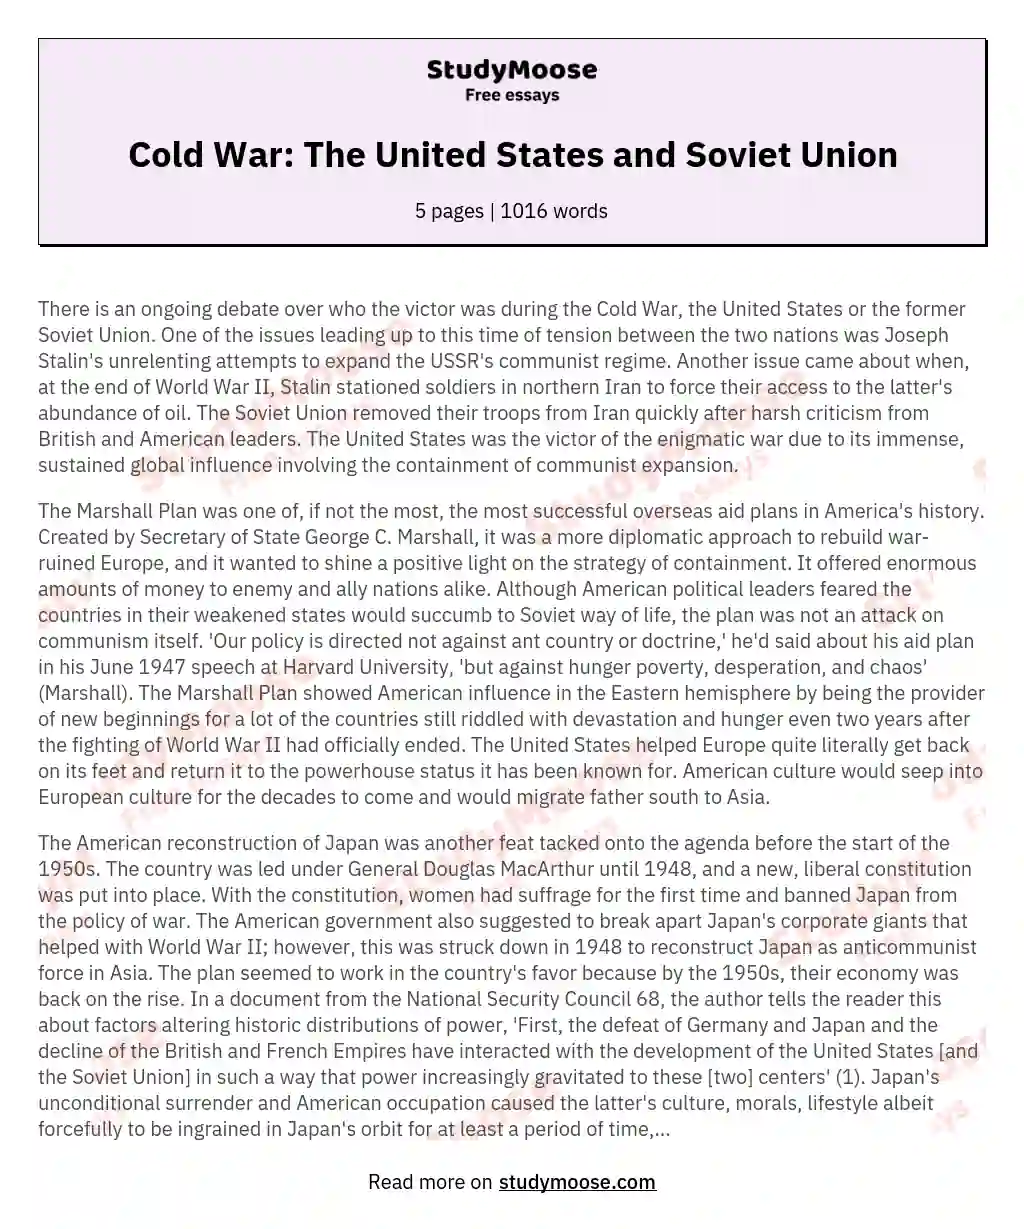 Cold War: The United States and Soviet Union